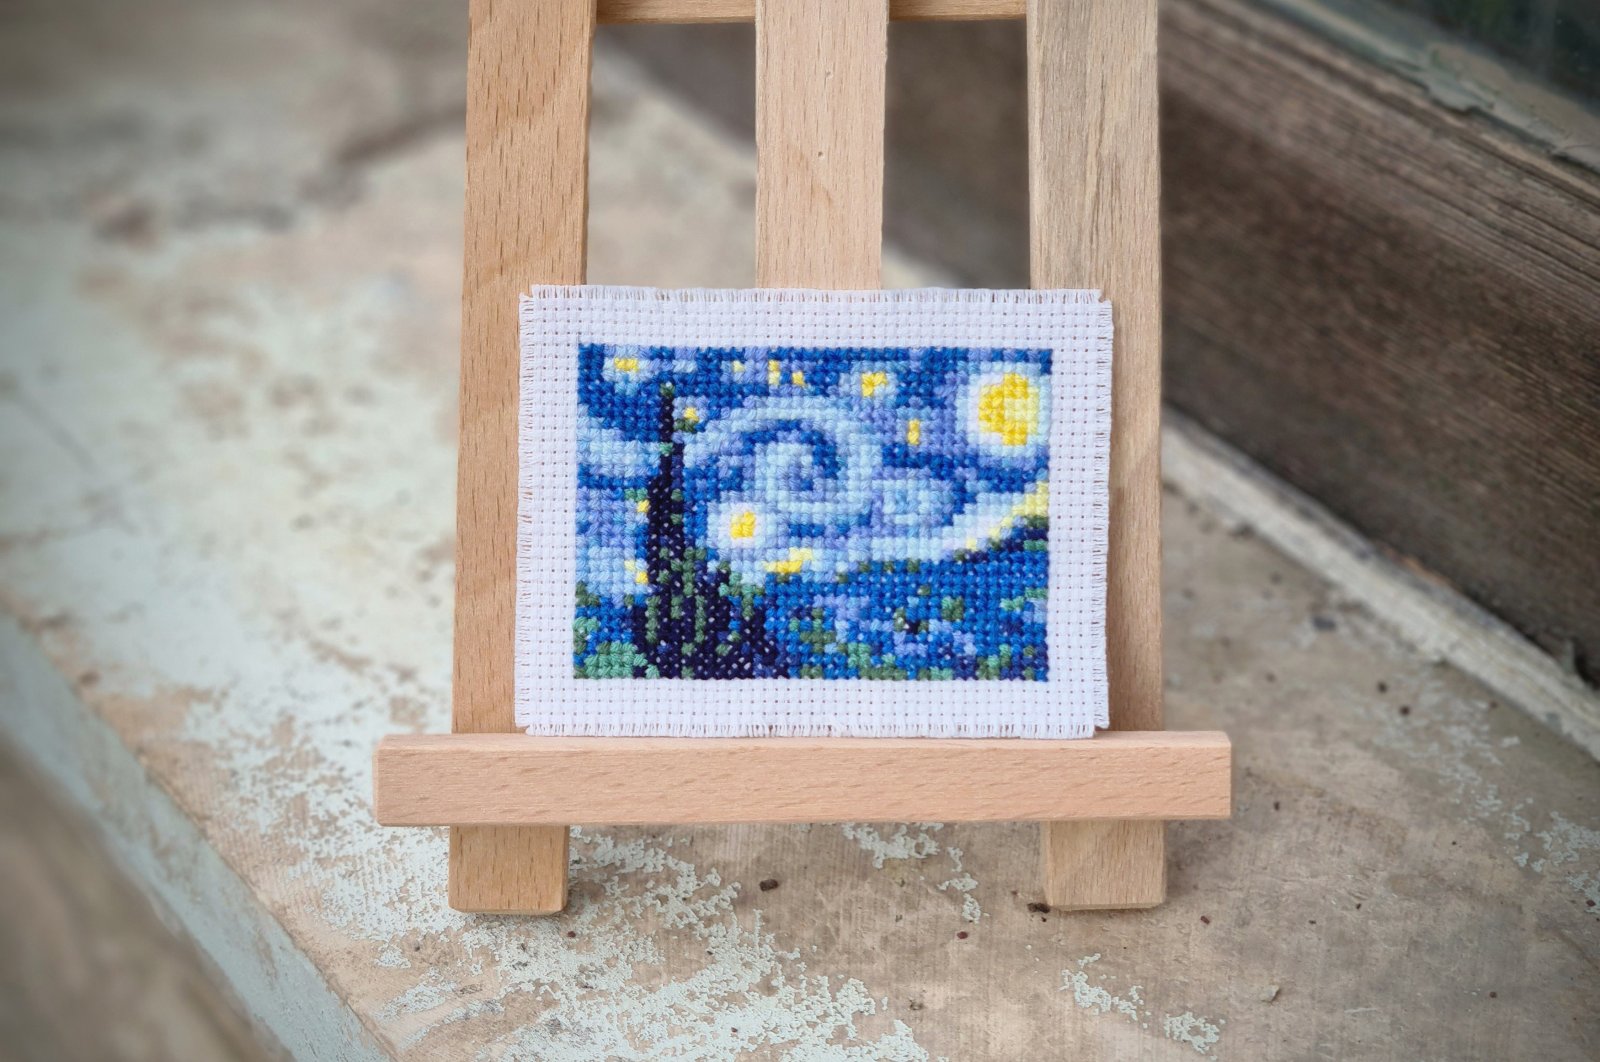 A recreation of "The Starry Night" from Elçin Özcan's mini-gallery comprising of cross-stitch versions of the world's most famous masterpieces. (DPA Photo)